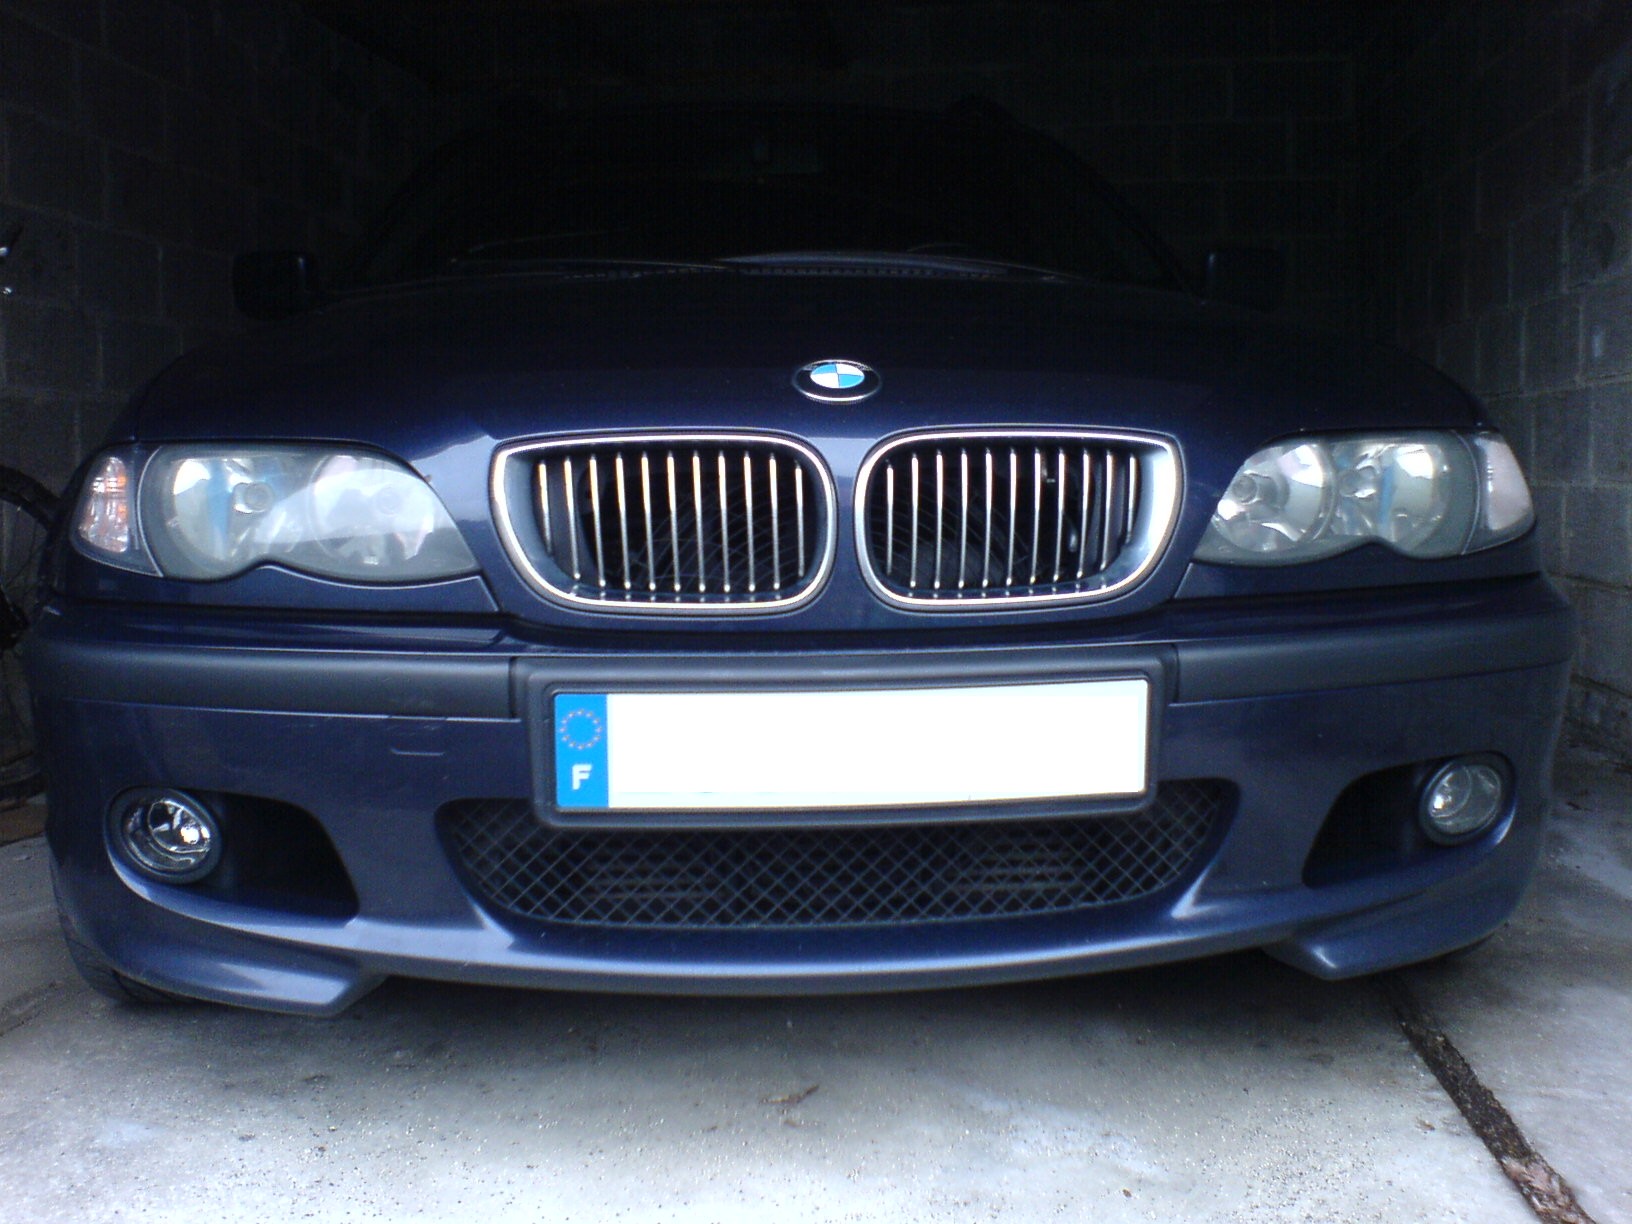 BMW 330xd : vibrations anormales : gros probleme ou simple ...